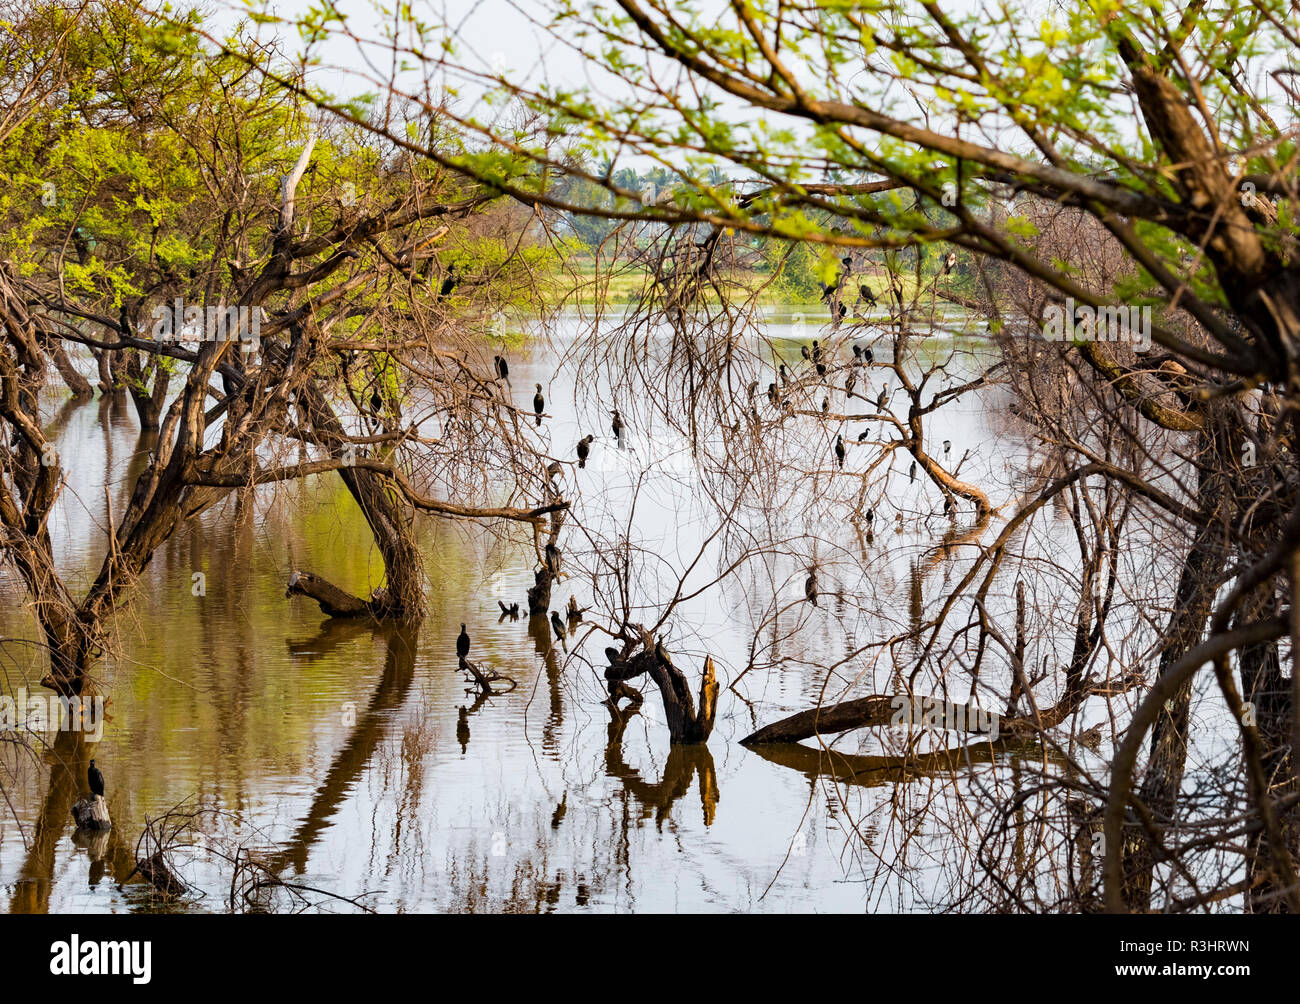 Cormorants are seen in search of food in a pond Stock Photo